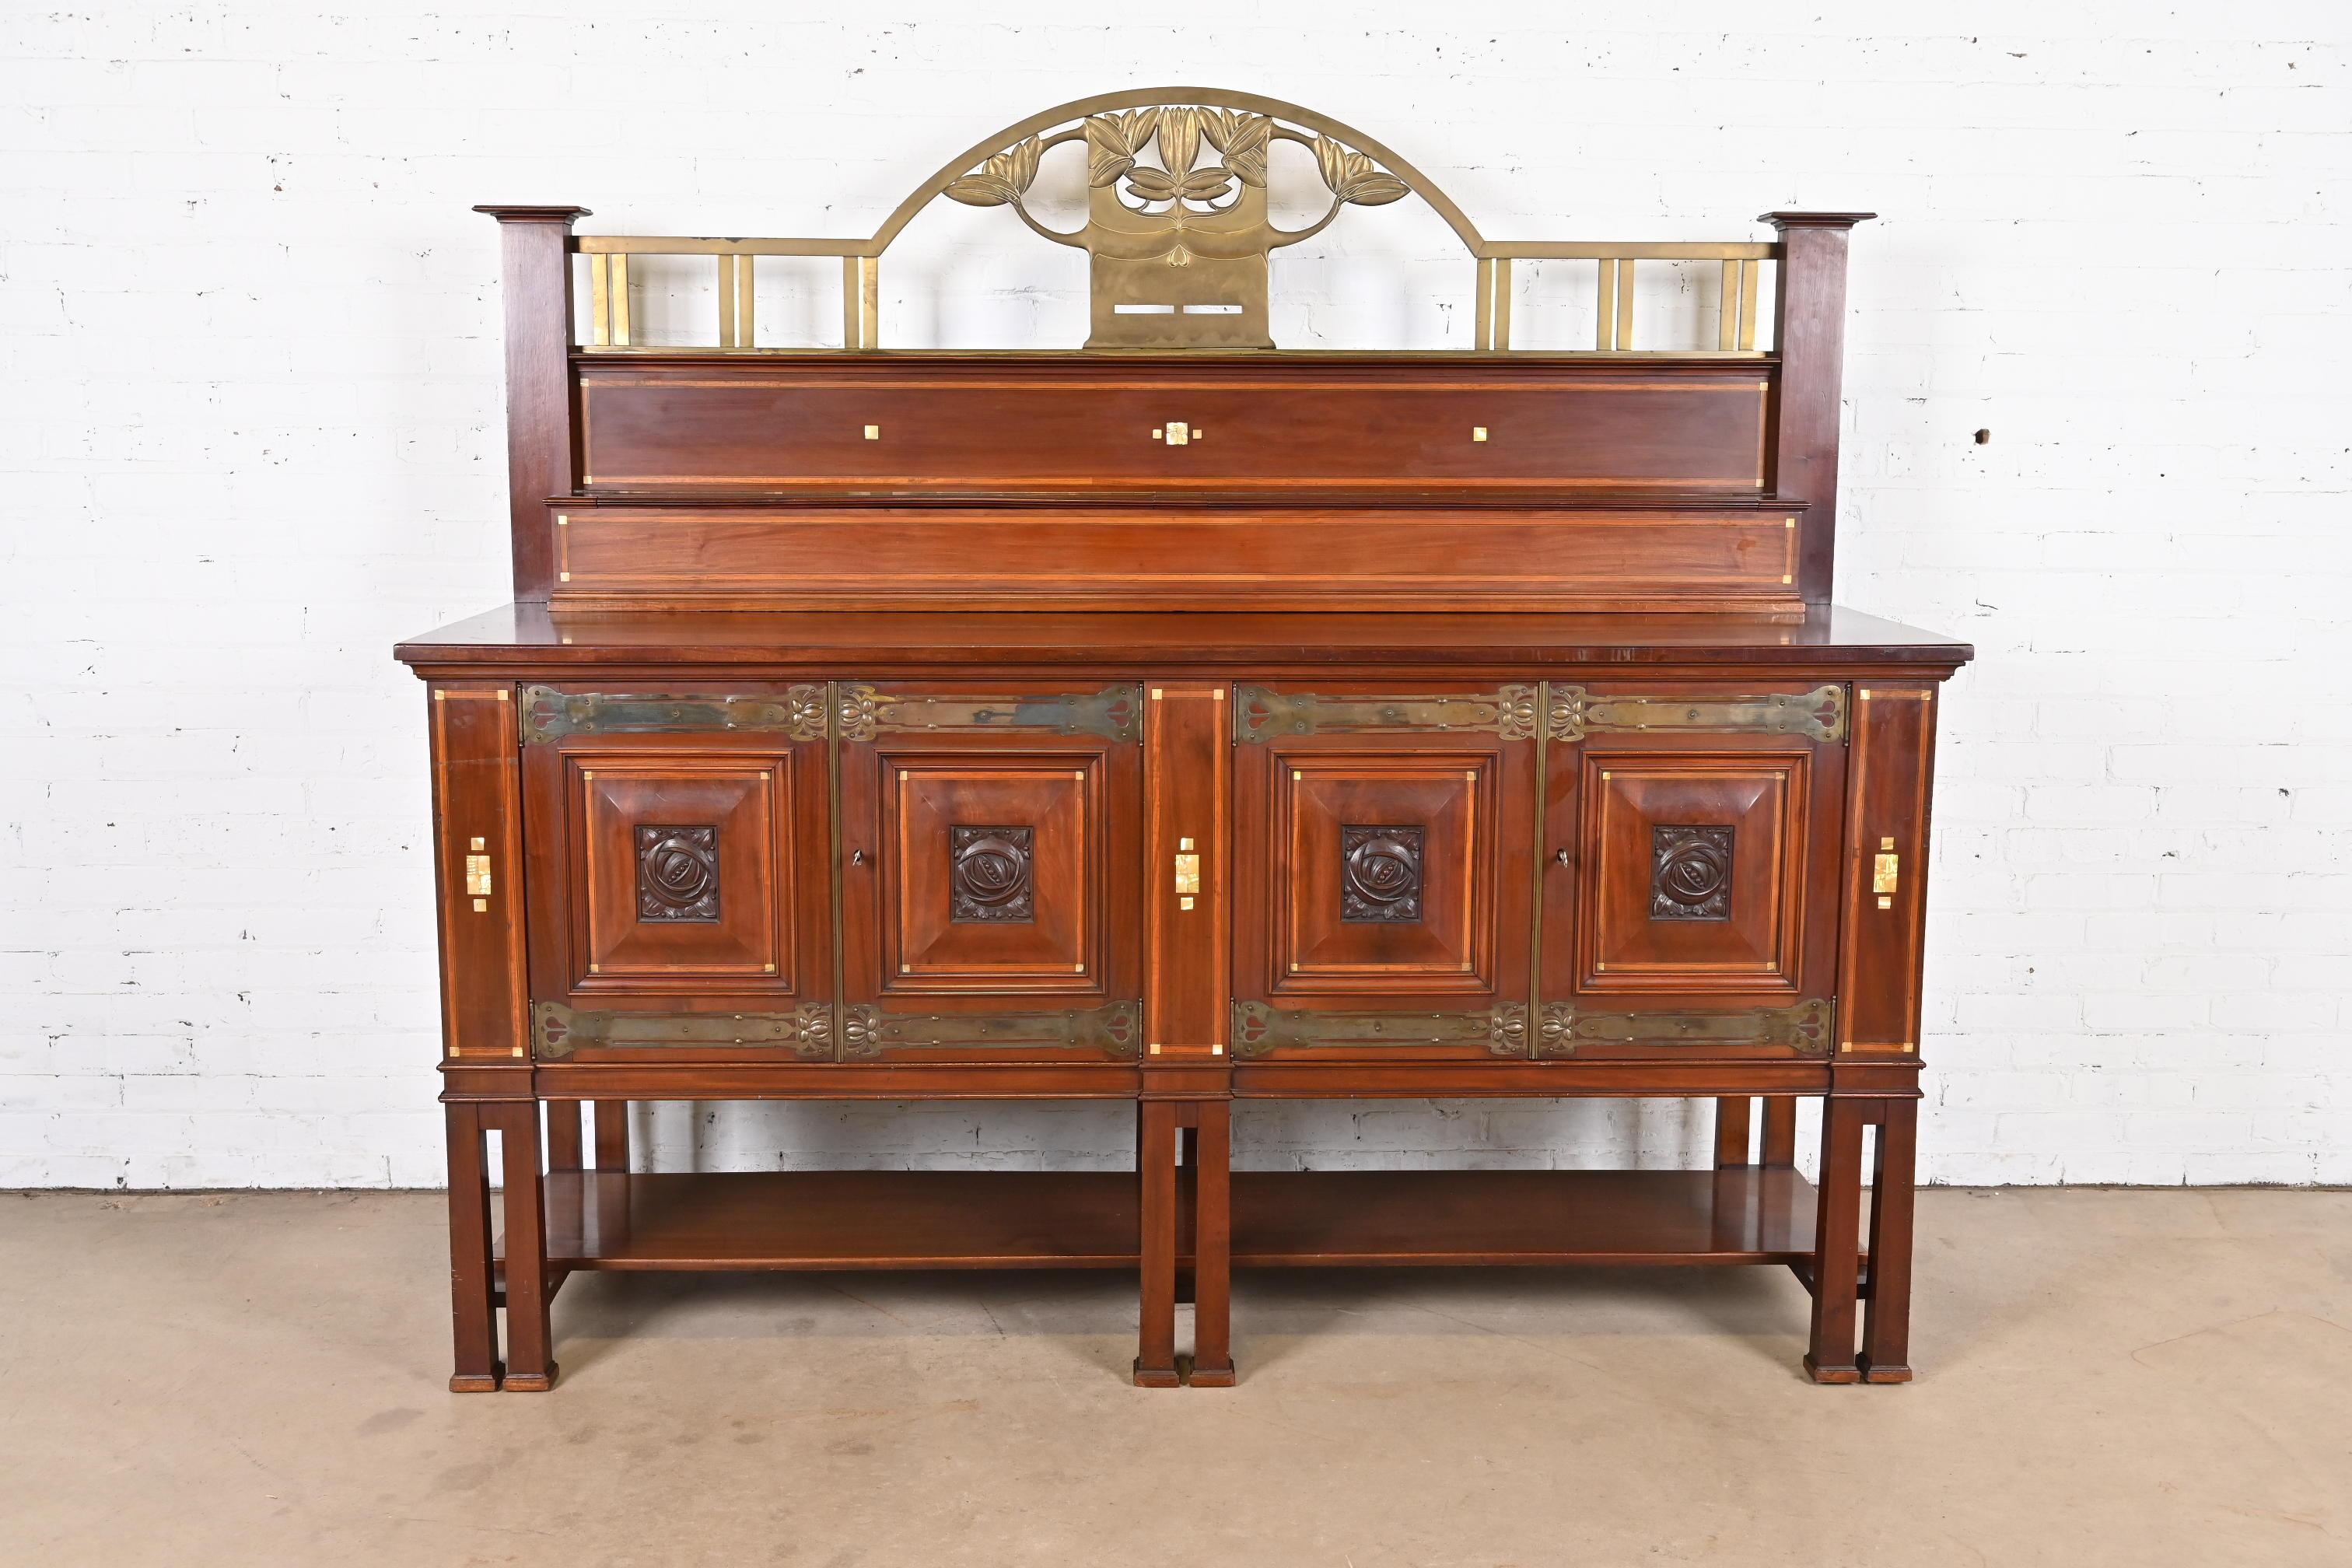 An exceptional English Arts & Crafts or Art Deco sideboard, buffet server, or bar cabinet

In the manner of Charles Rennie Mackintosh

By Robson & Sons

England, Circa 1900

Gorgeous mahogany, with Mackintosh-style carved roses, Mother-of-Pearl and